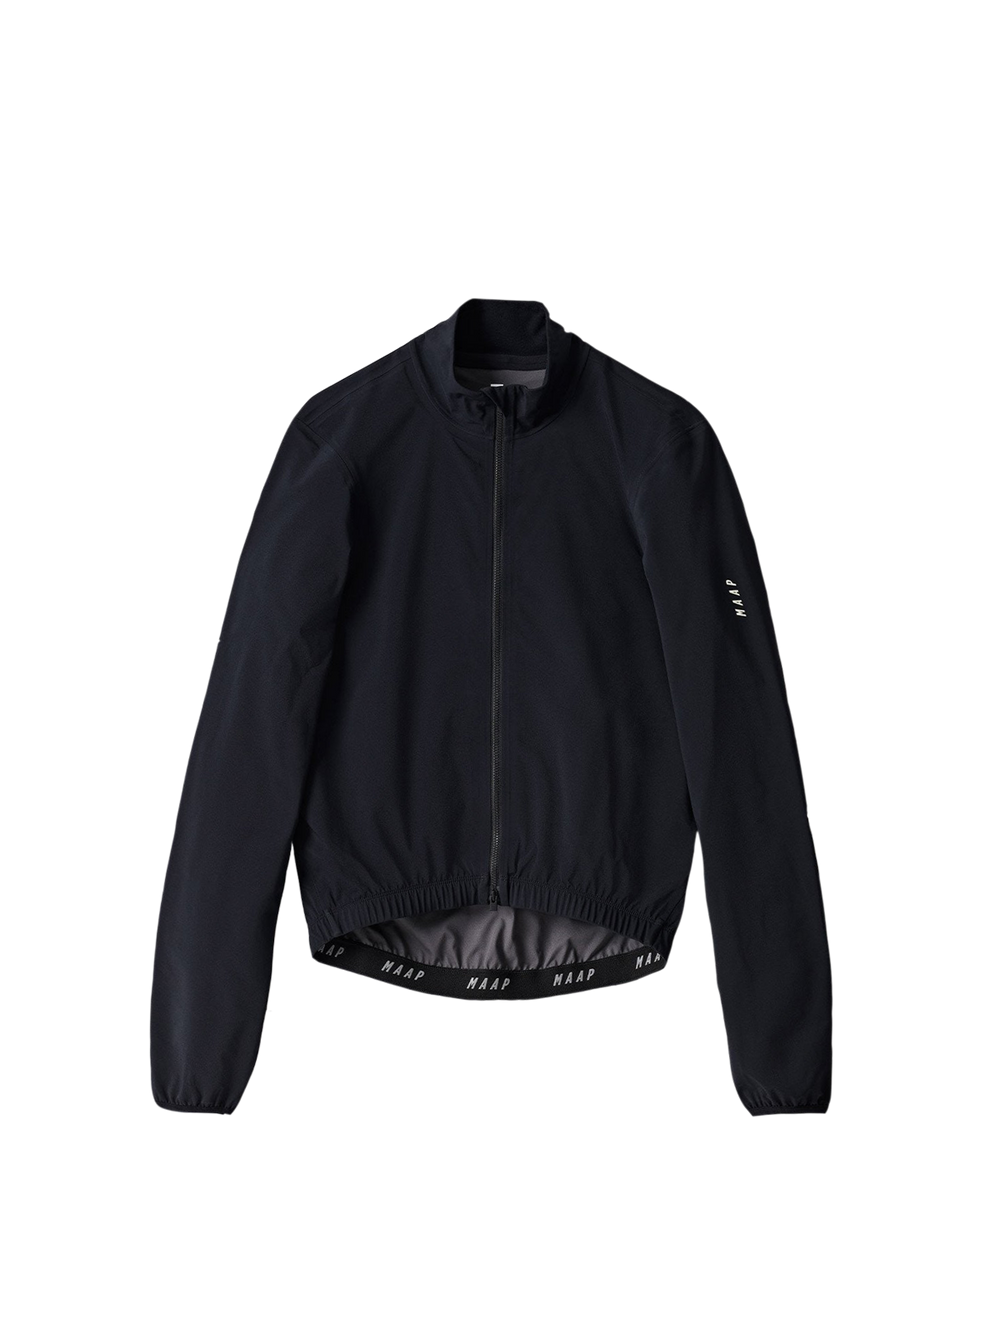 Product Image for Prime Jacket